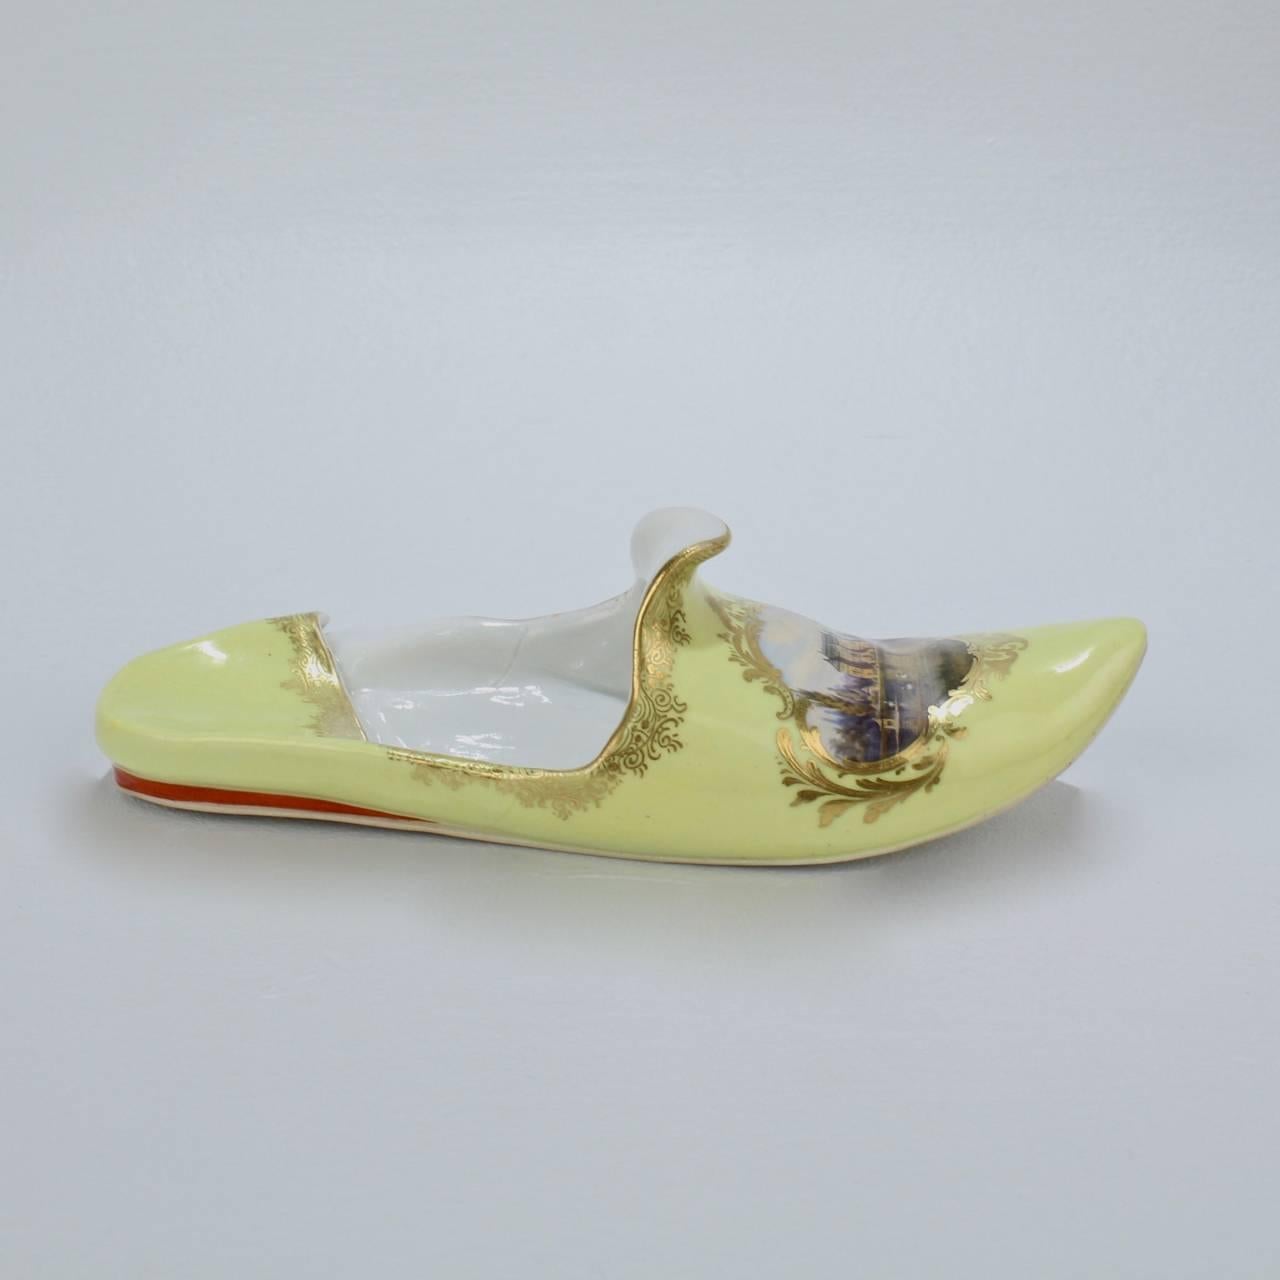 19th Century Antique Topographical Meissen Porcelain Shoe with Dresden Palace & Gardens Scene